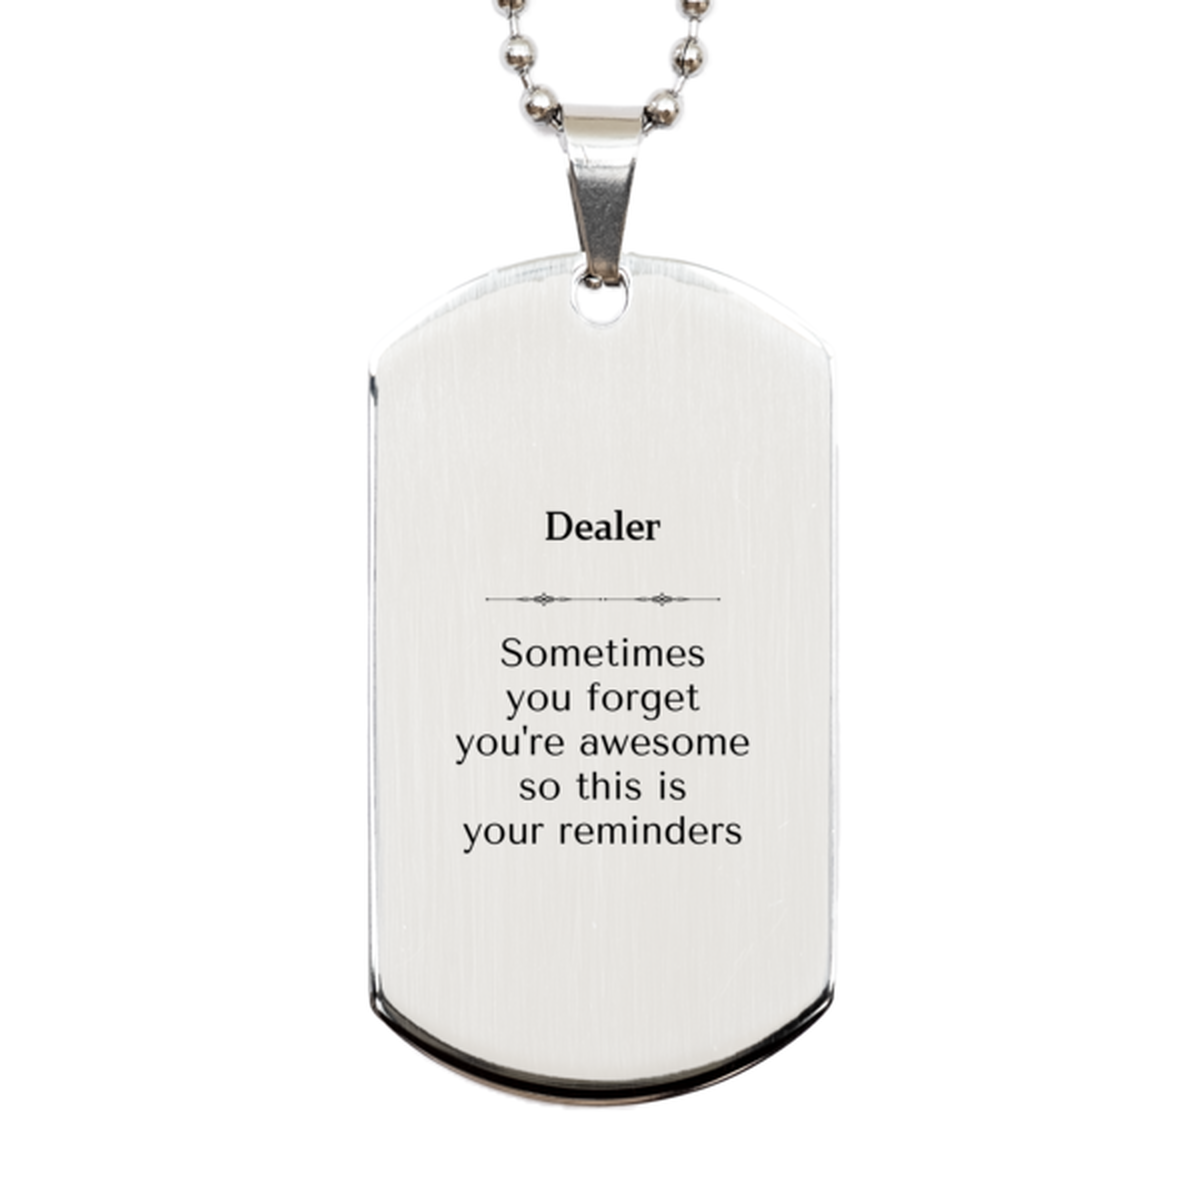 Sentimental Dealer Silver Dog Tag, Dealer Sometimes you forget you're awesome so this is your reminders, Graduation Christmas Birthday Gifts for Dealer, Men, Women, Coworkers